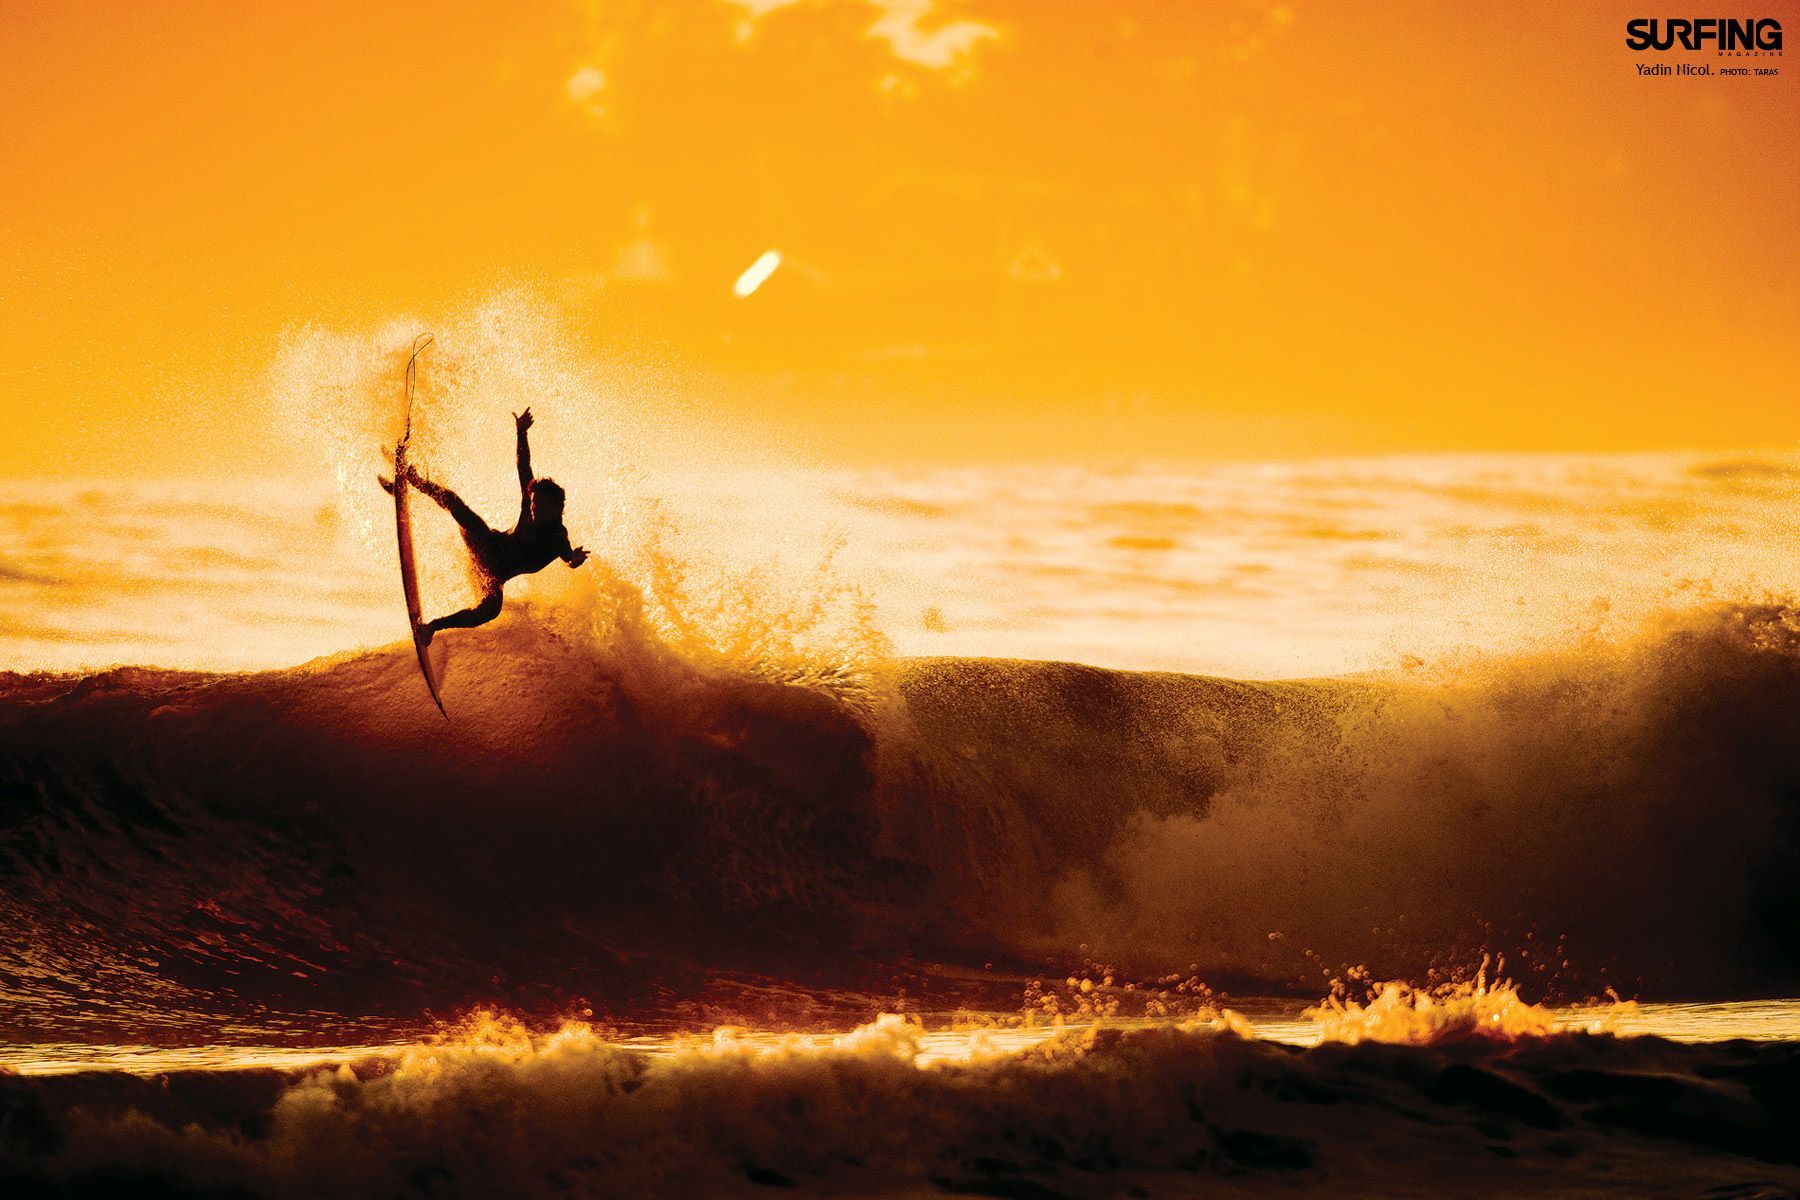 202 Surfing HD Wallpapers | Backgrounds - Wallpaper Abyss